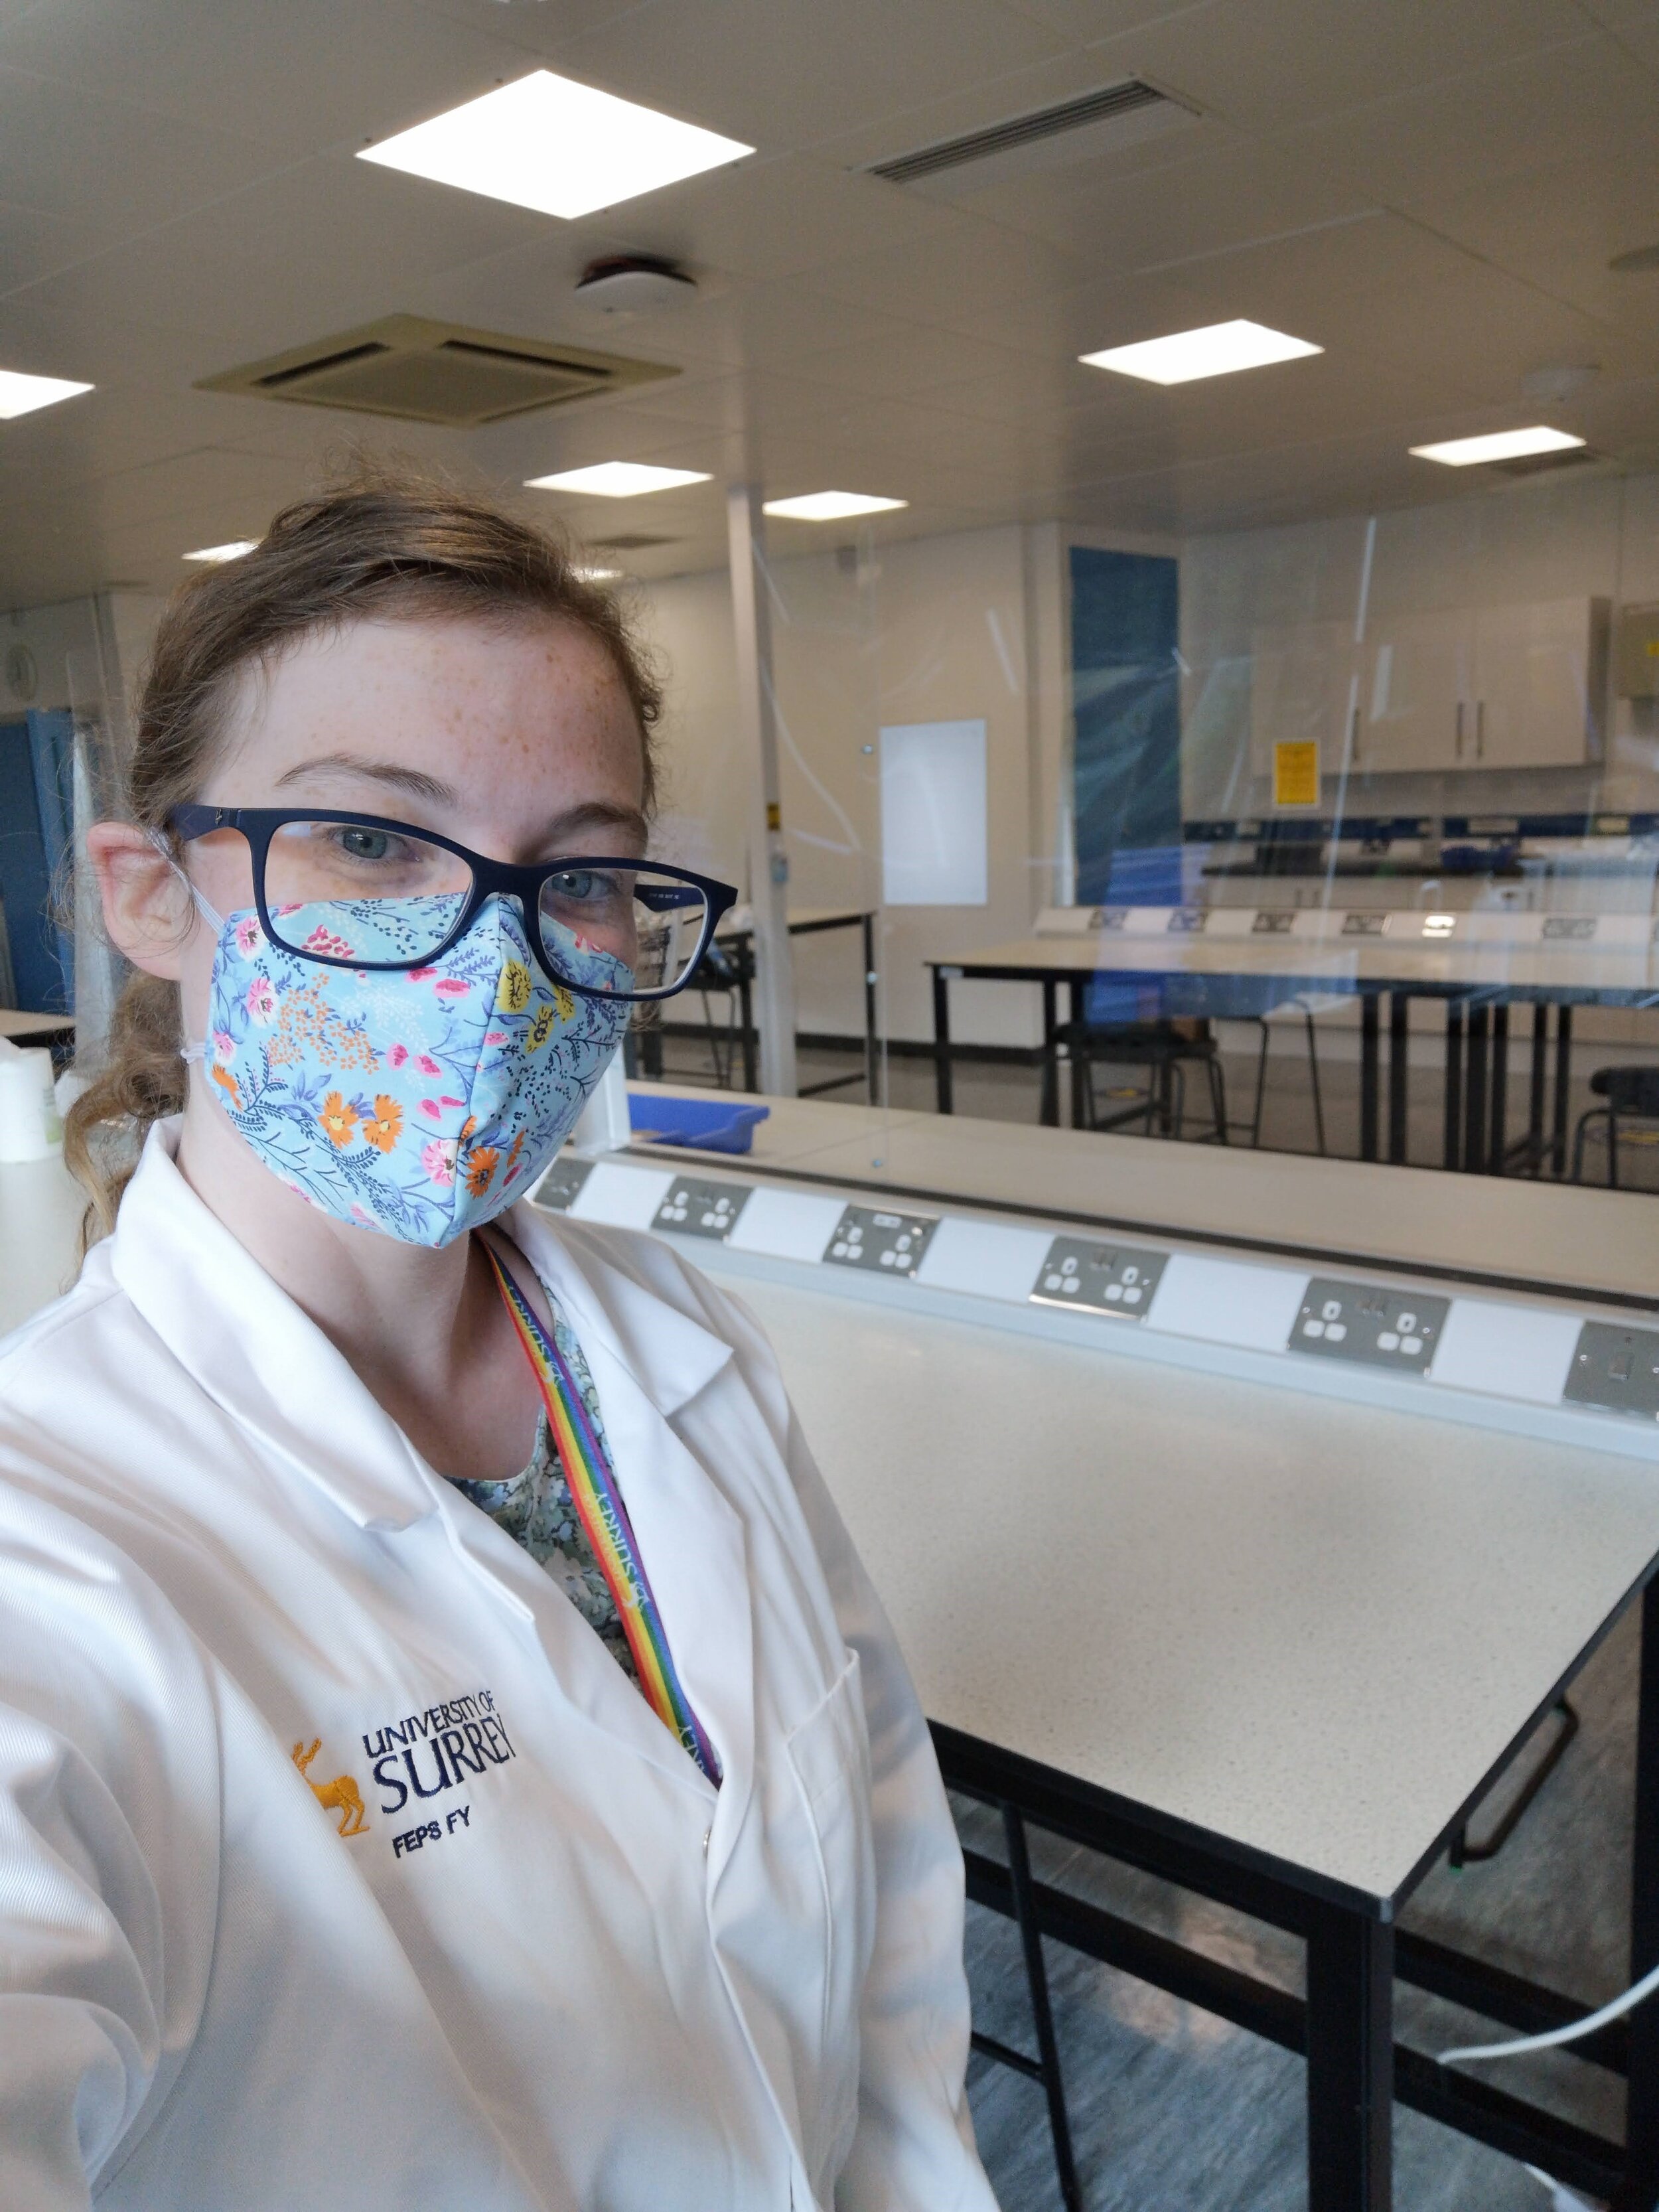  Daisy in the faculty of engineering and physical science foundation year labs where she was a lab demonstrator during the 2020 pandemic 